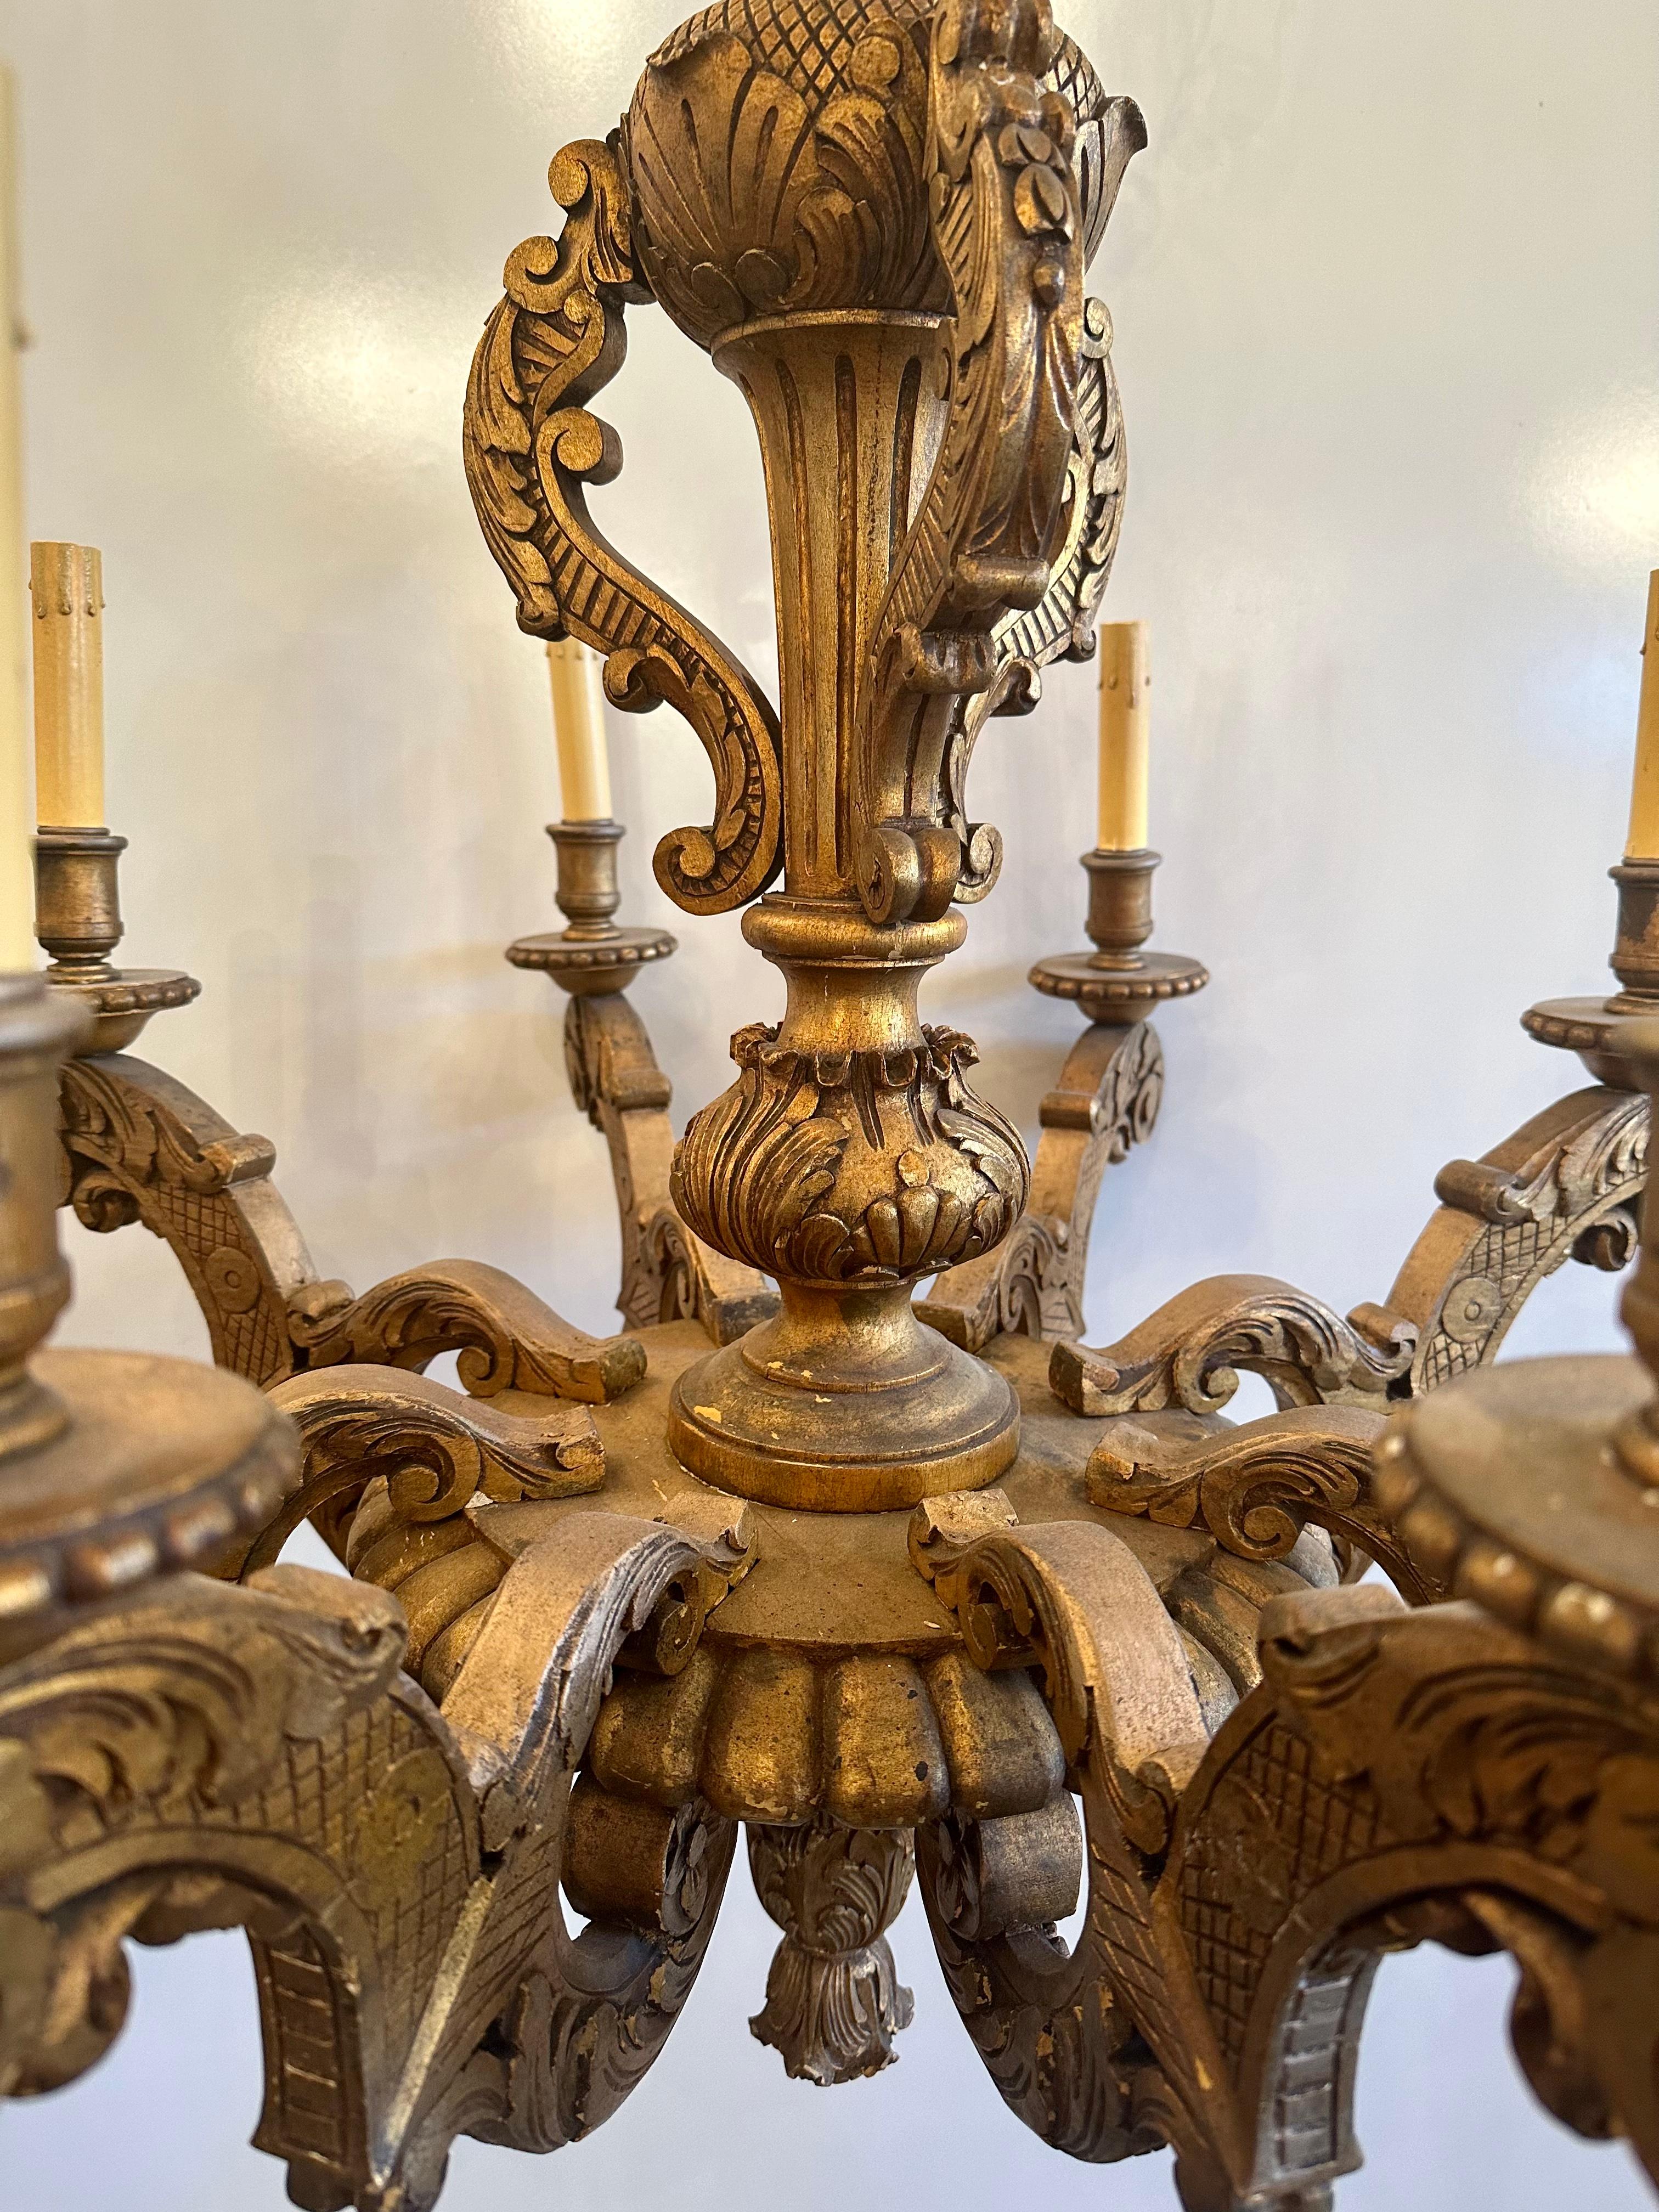 Early 20th Century 19th Century European Carved Wood Chandelier with Gilded Gold Original Finish  For Sale